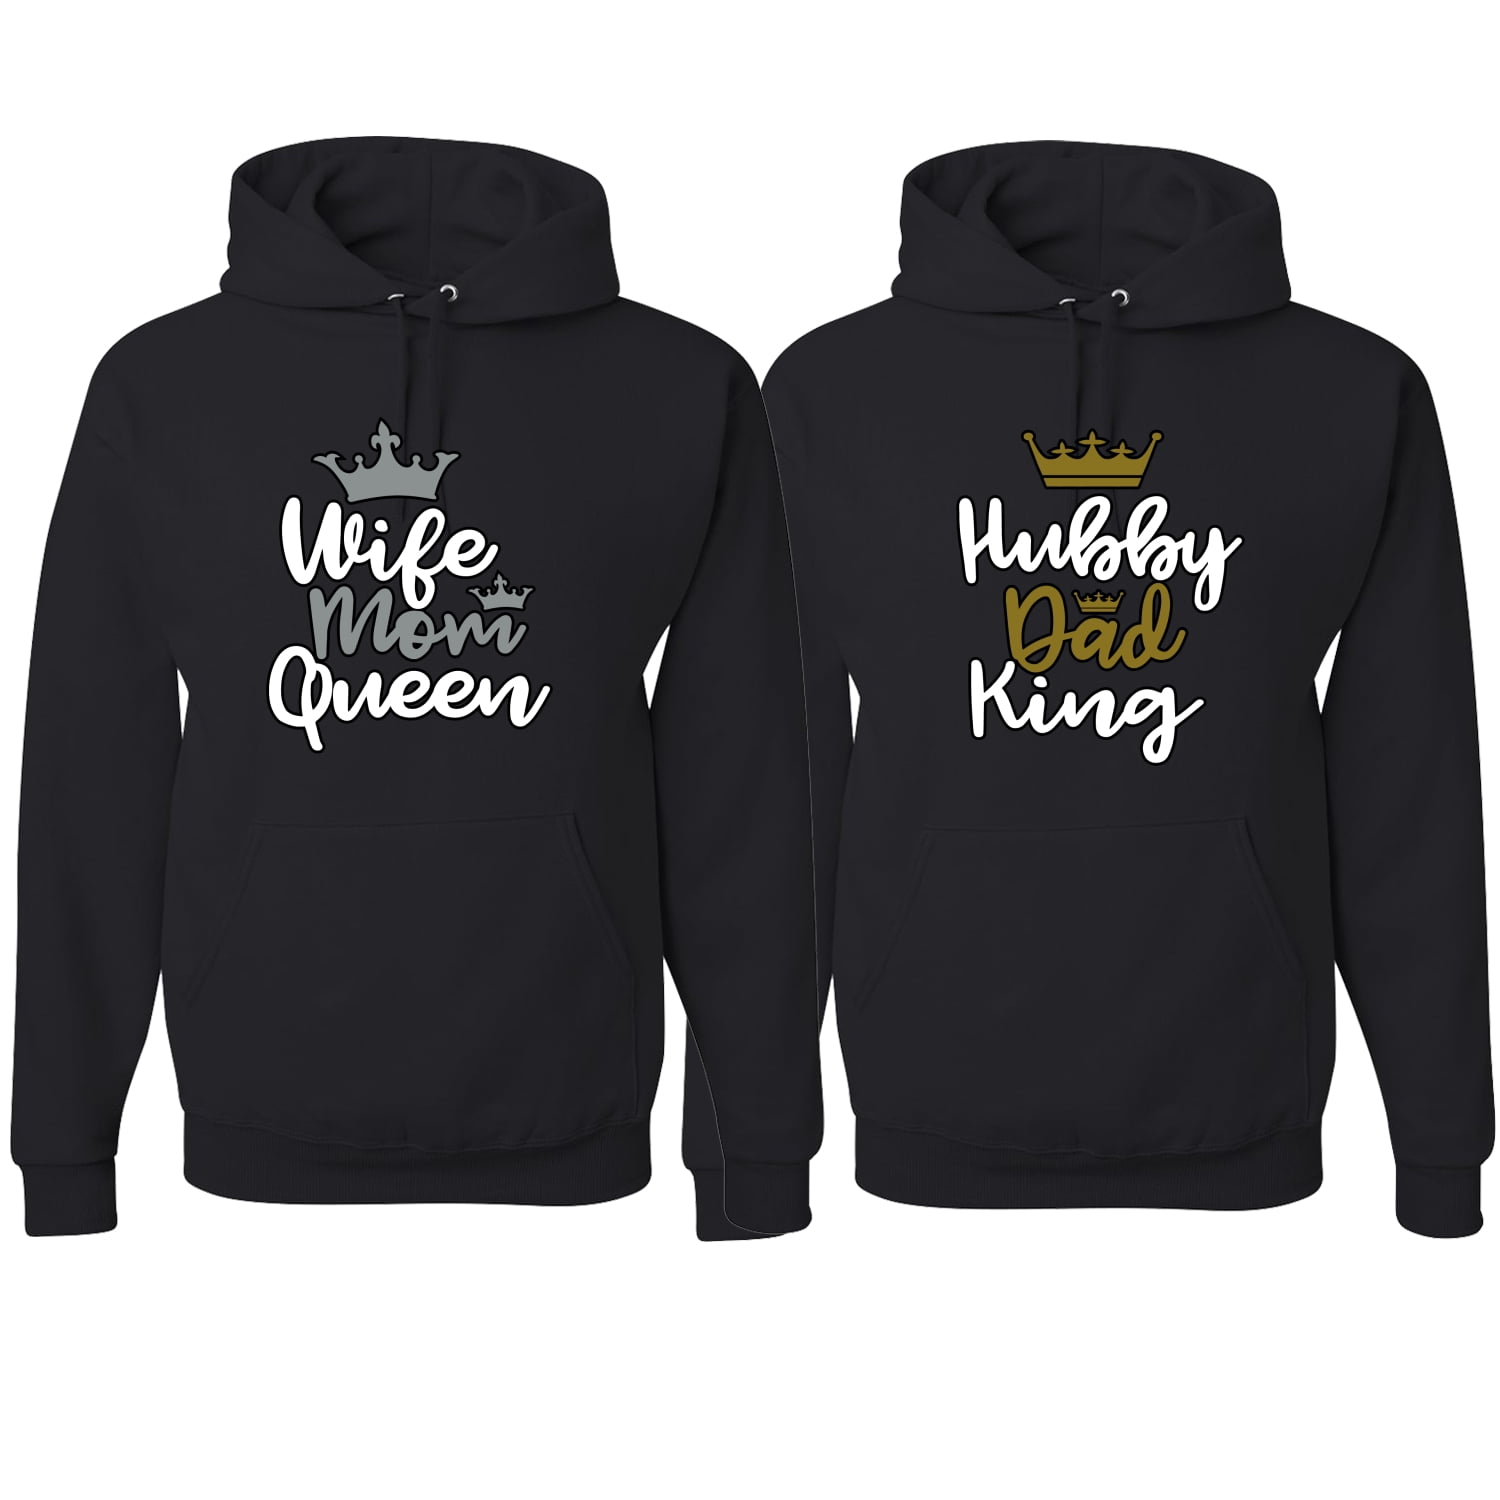 Couple Clothes King And Queen Hoodie Jumper Sweater Women's Coat Men's Hooded